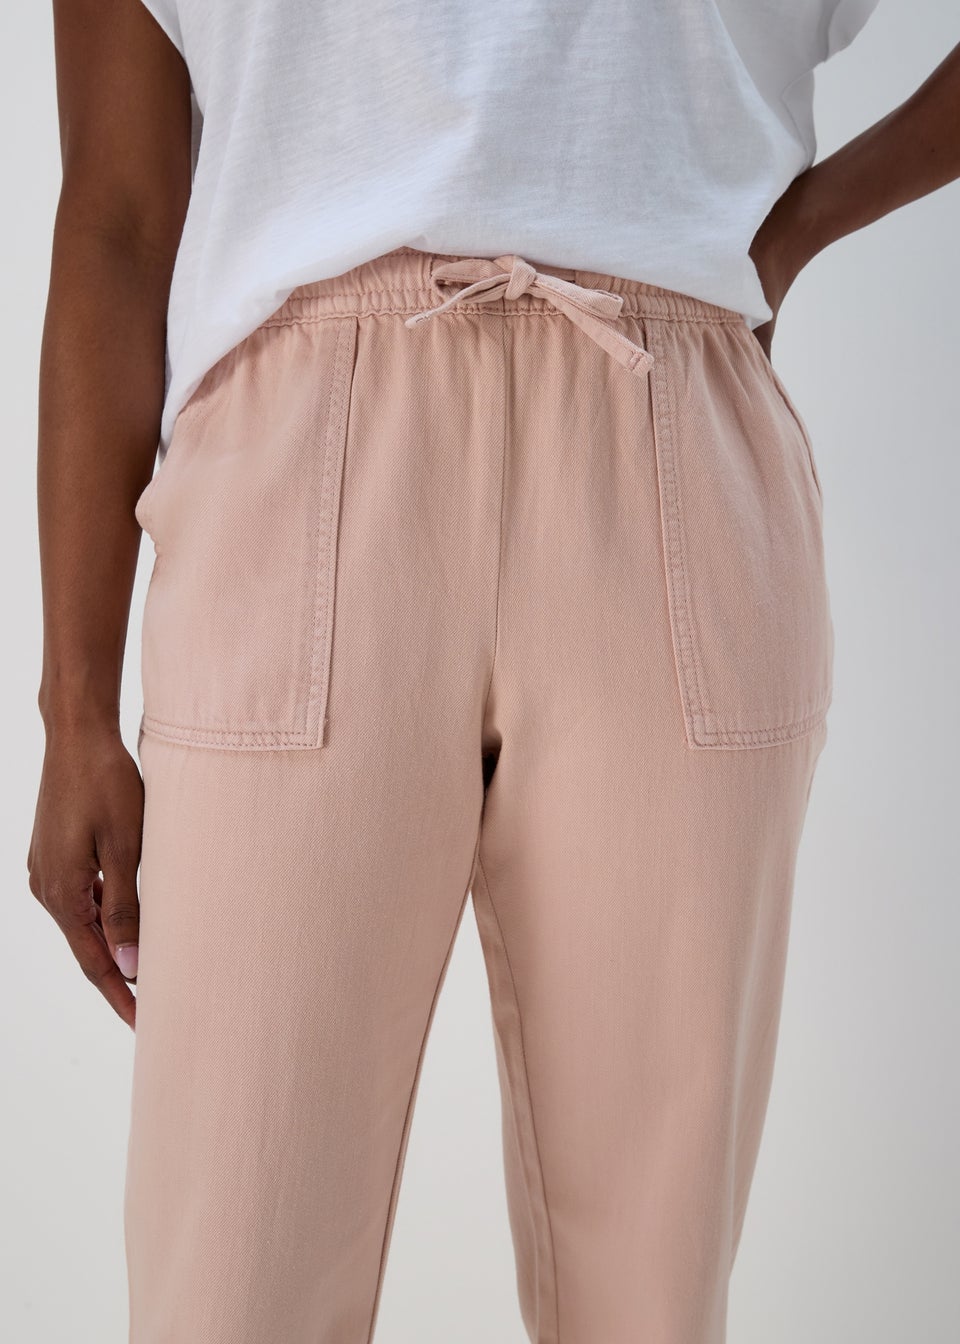 Barbie Pink Utility Joggers